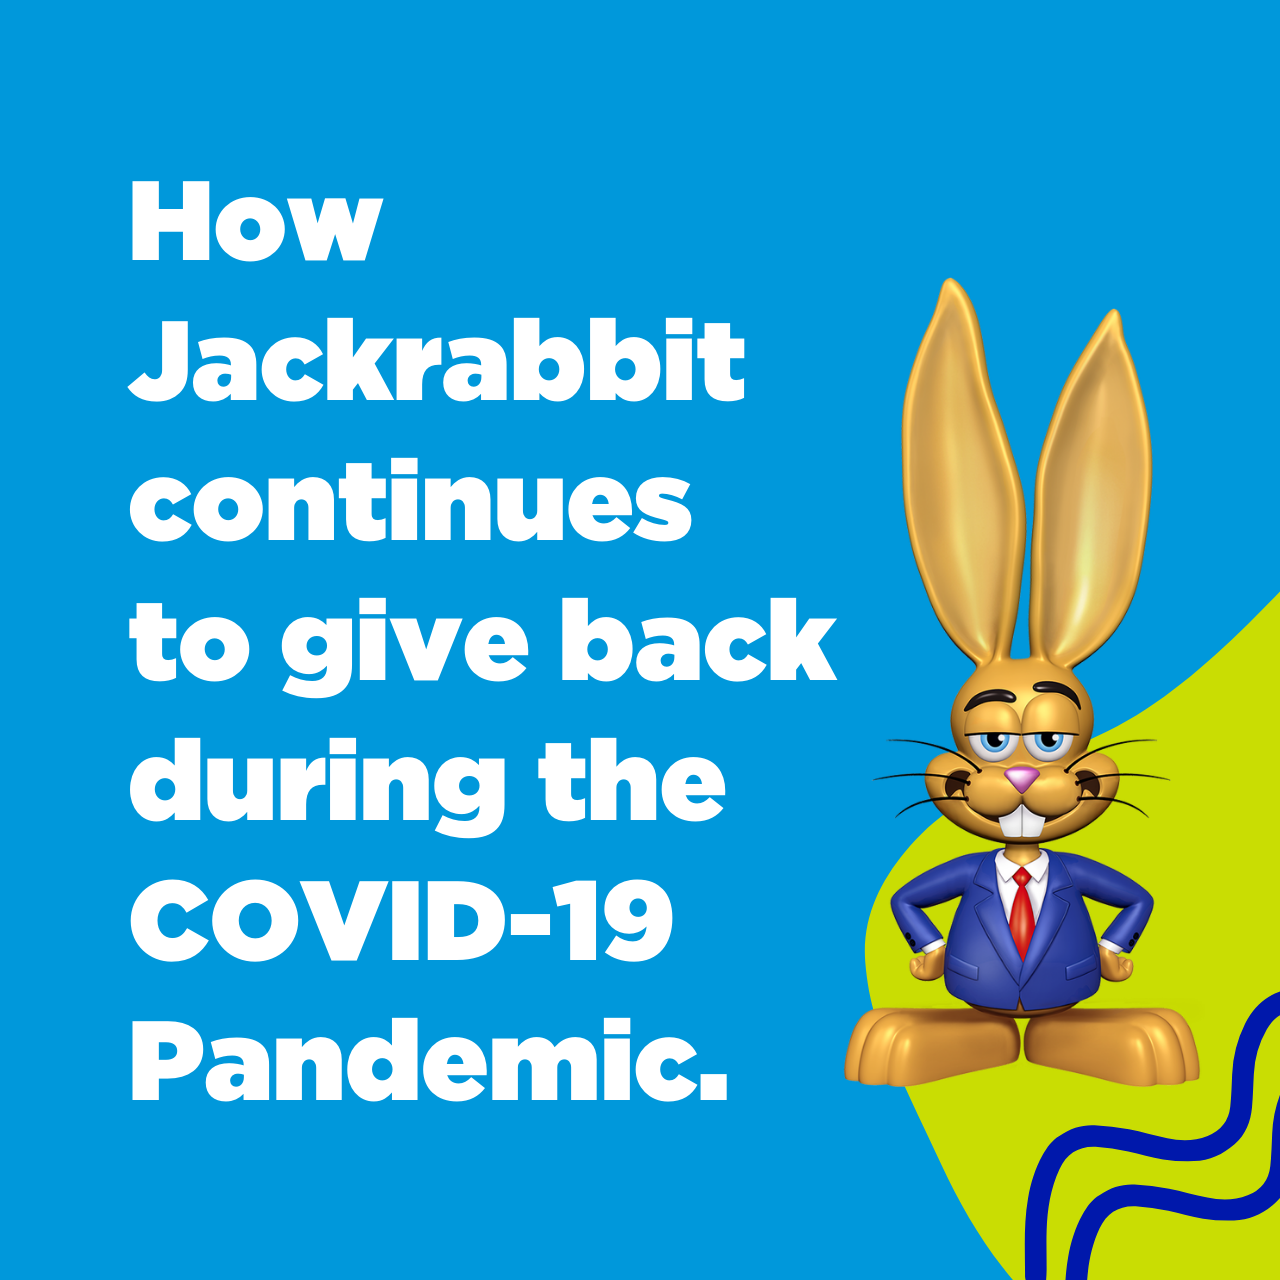 Jackrabbit’s Community Service Efforts Continue As COVID-19 Pandemic Approaches One-Year Mark